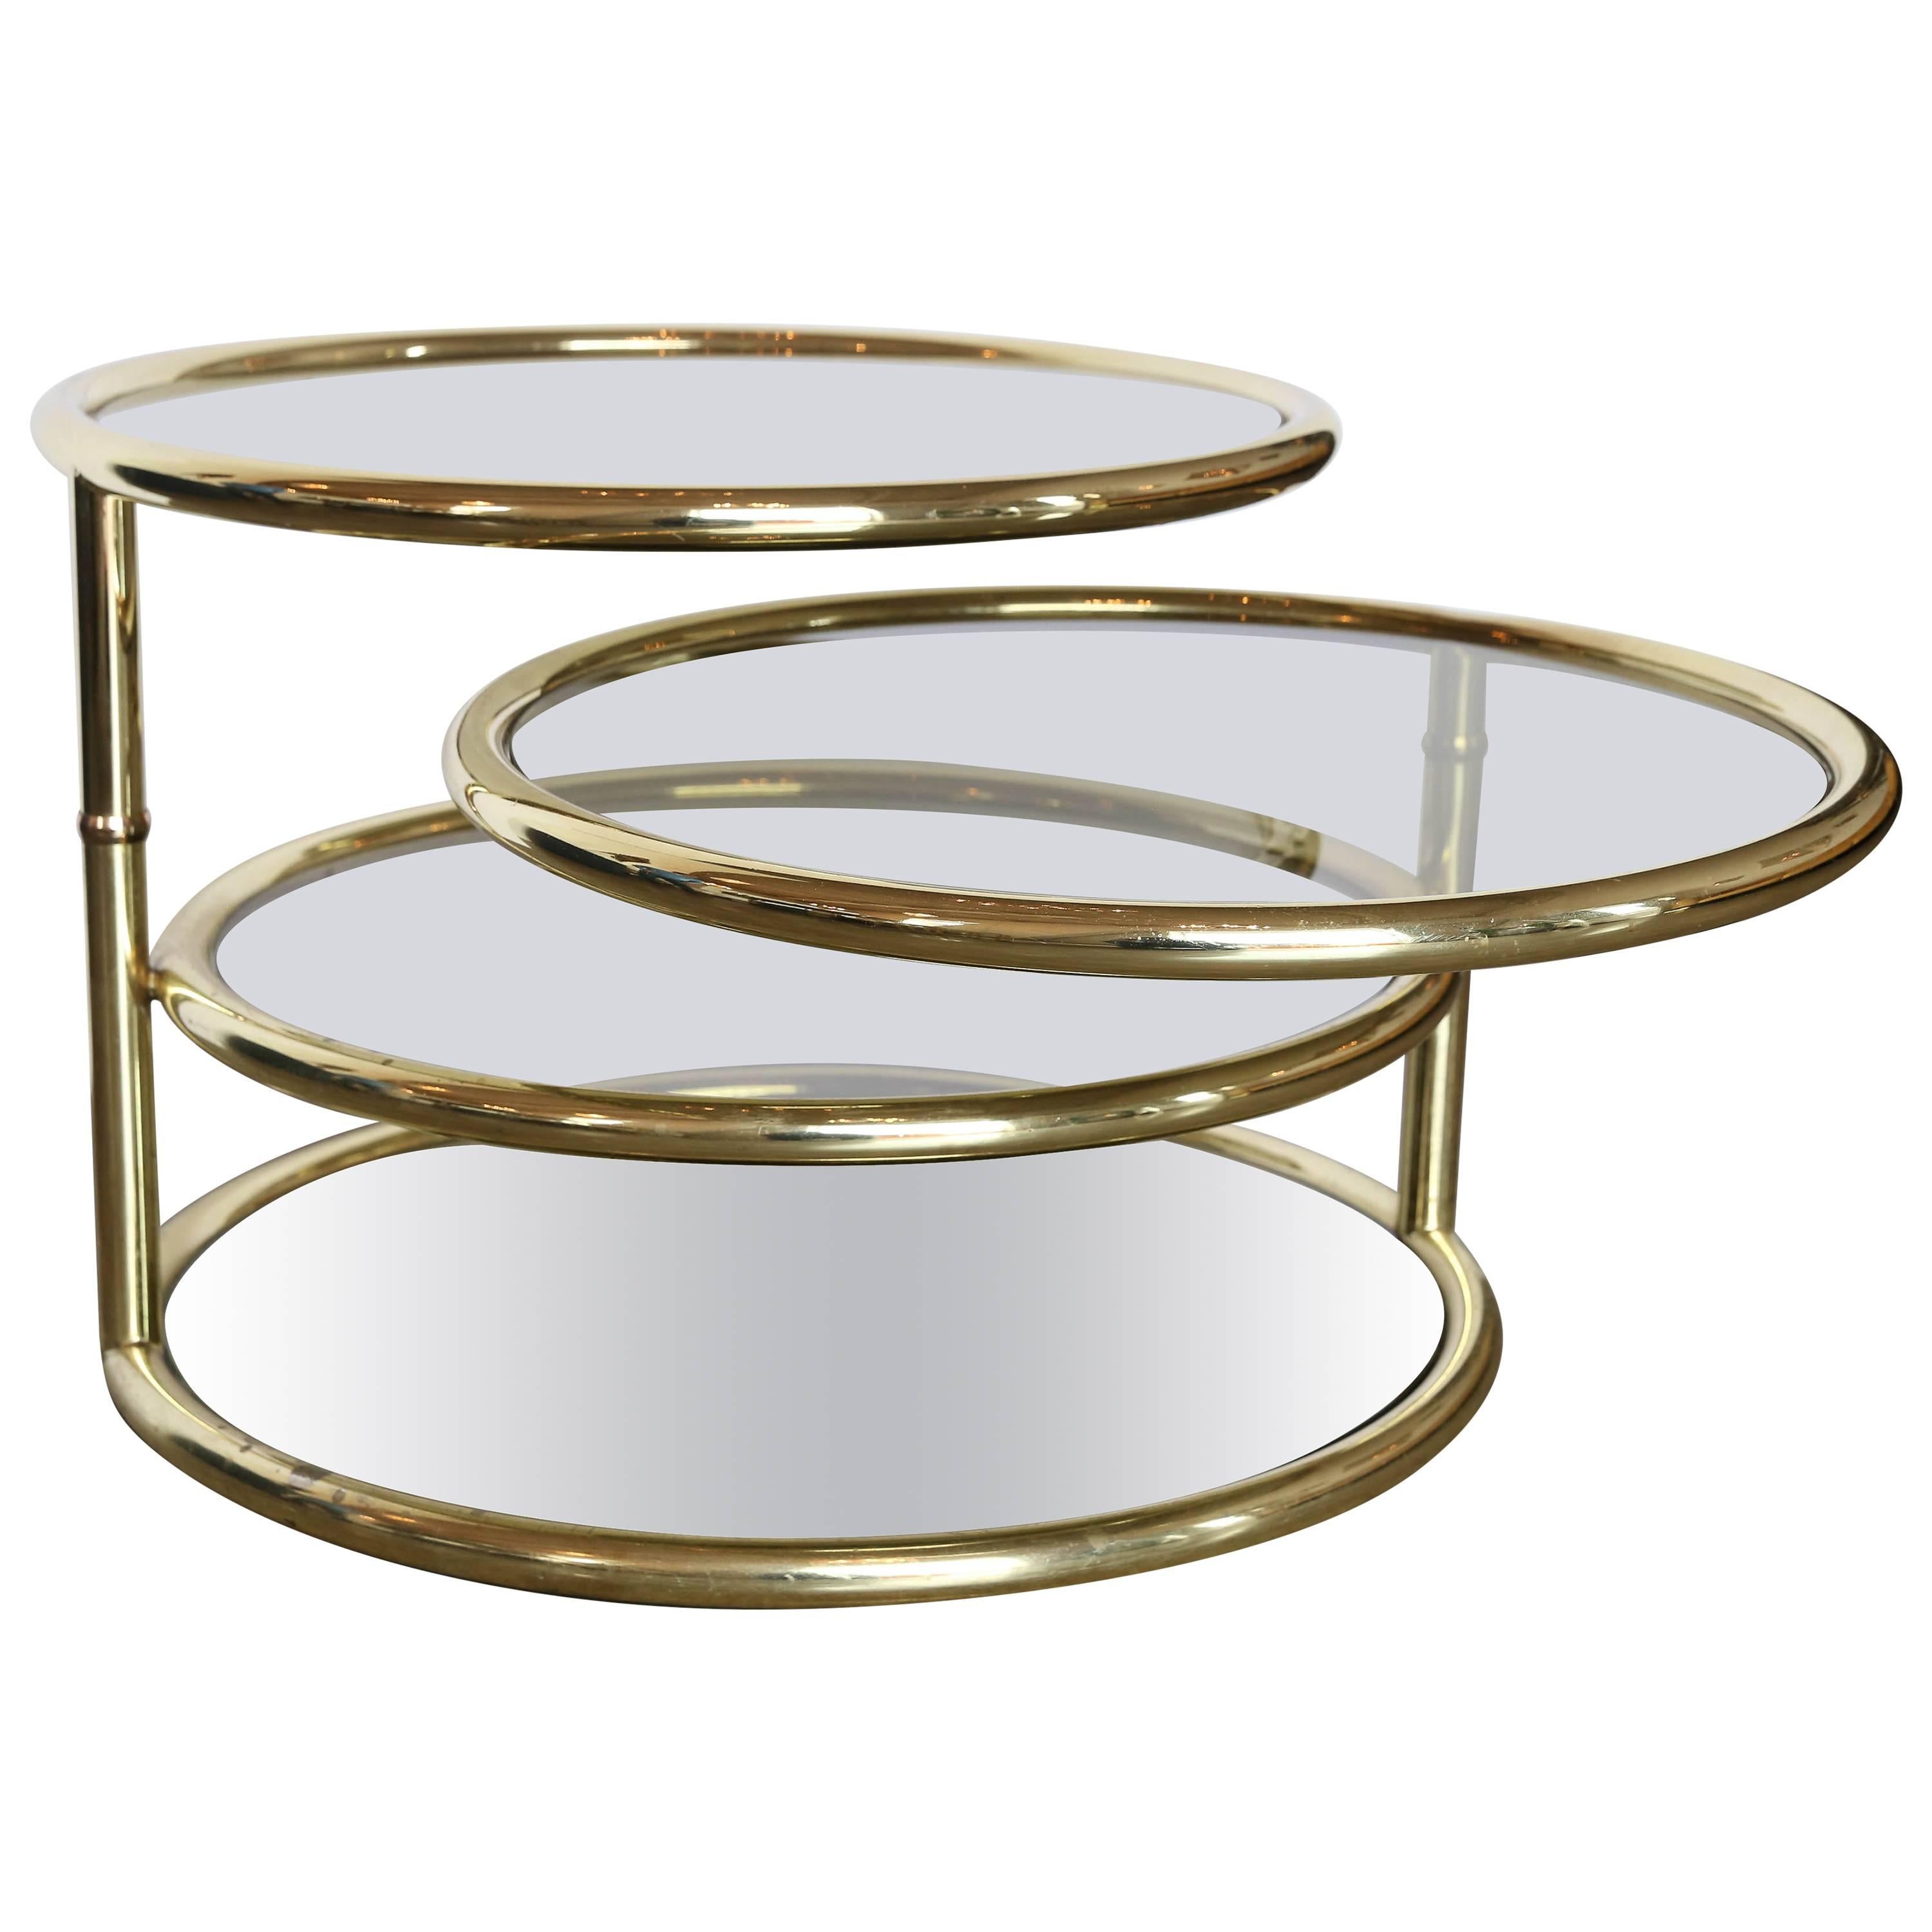 Milo Baughman Four-Tier Smoke Glass and Brass Swivel Cocktail or Side Table